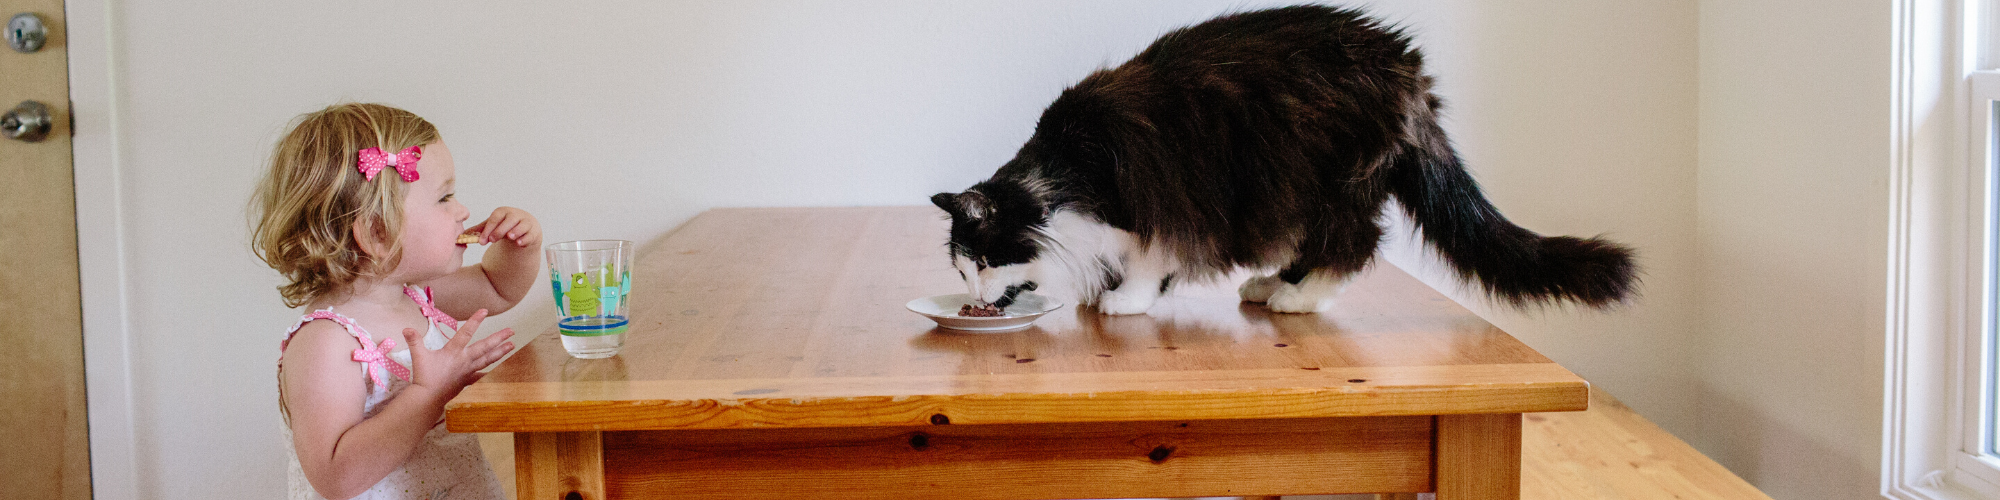 Why Do Cats Eat Their Vomit?